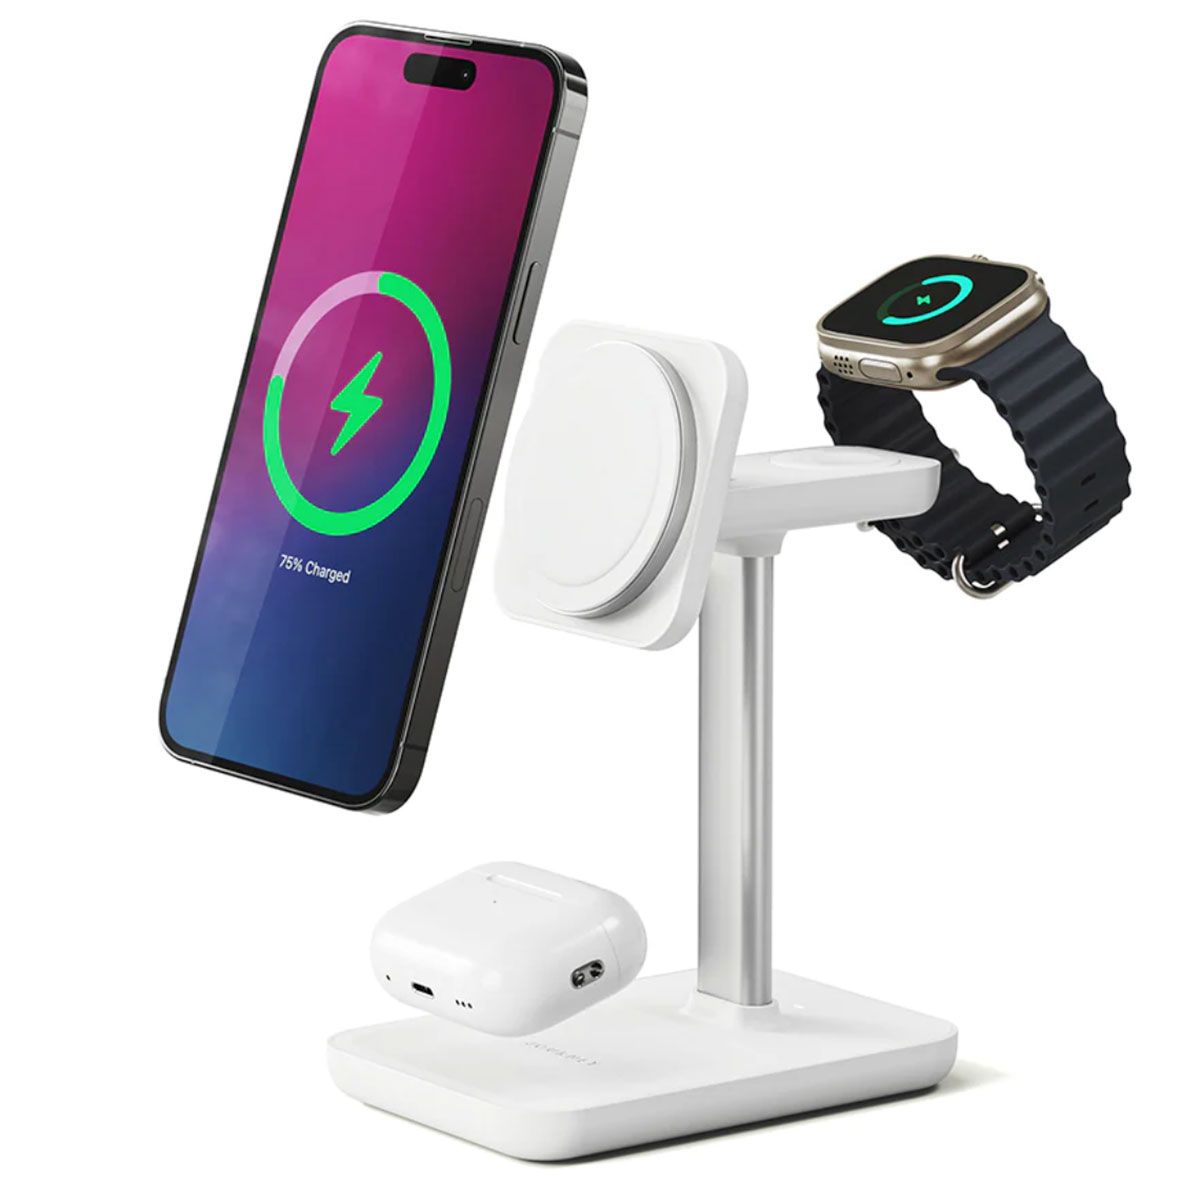 mophie's new 3-in-1 wireless charging stand with MagSafe incorporates an  adjustable height for iPhone